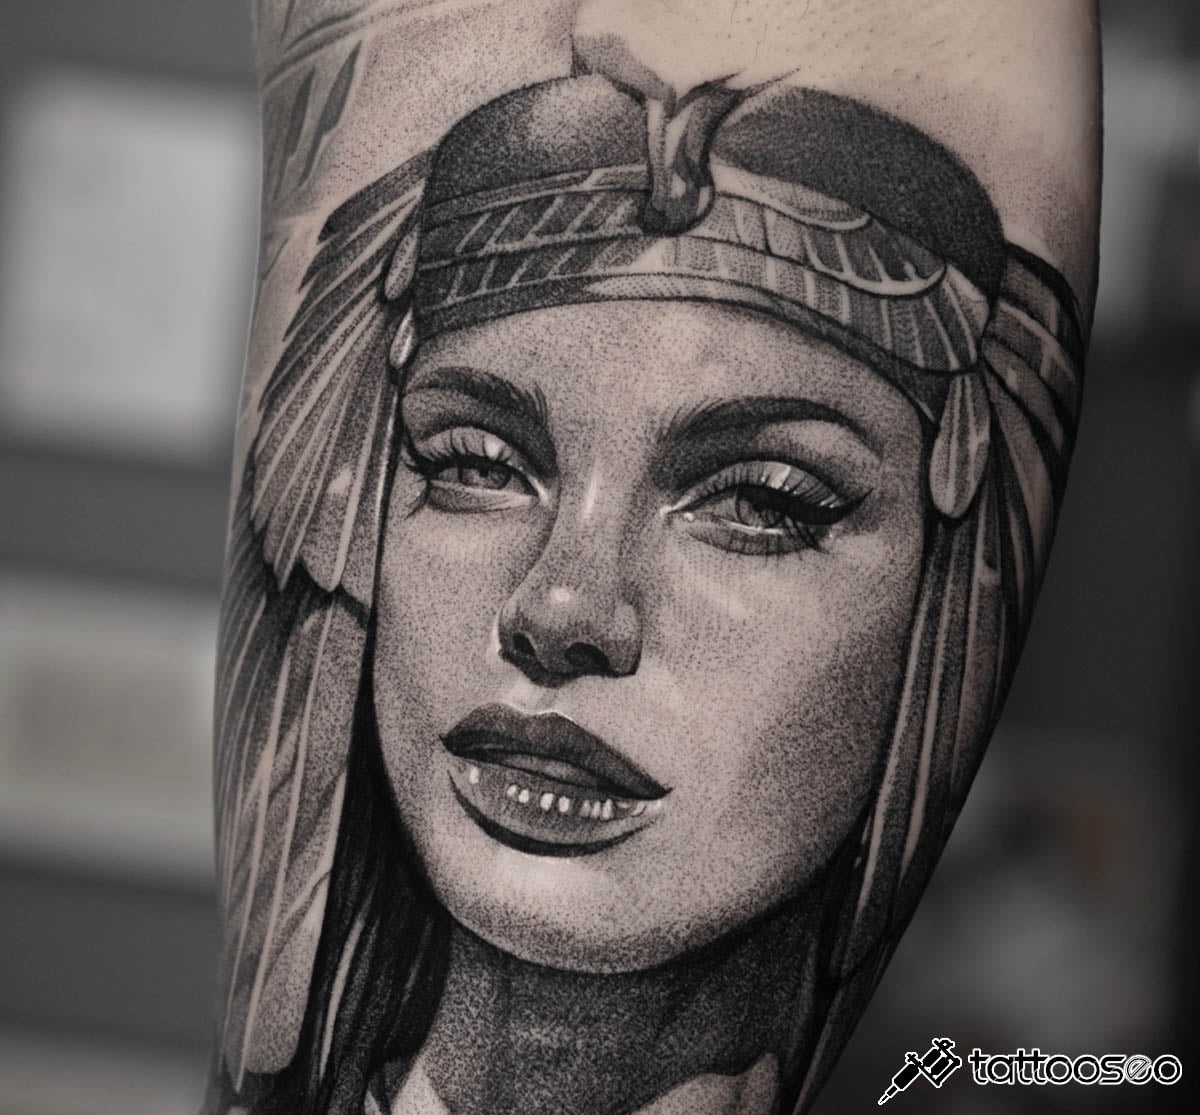 Cleopatra tattoo meaning